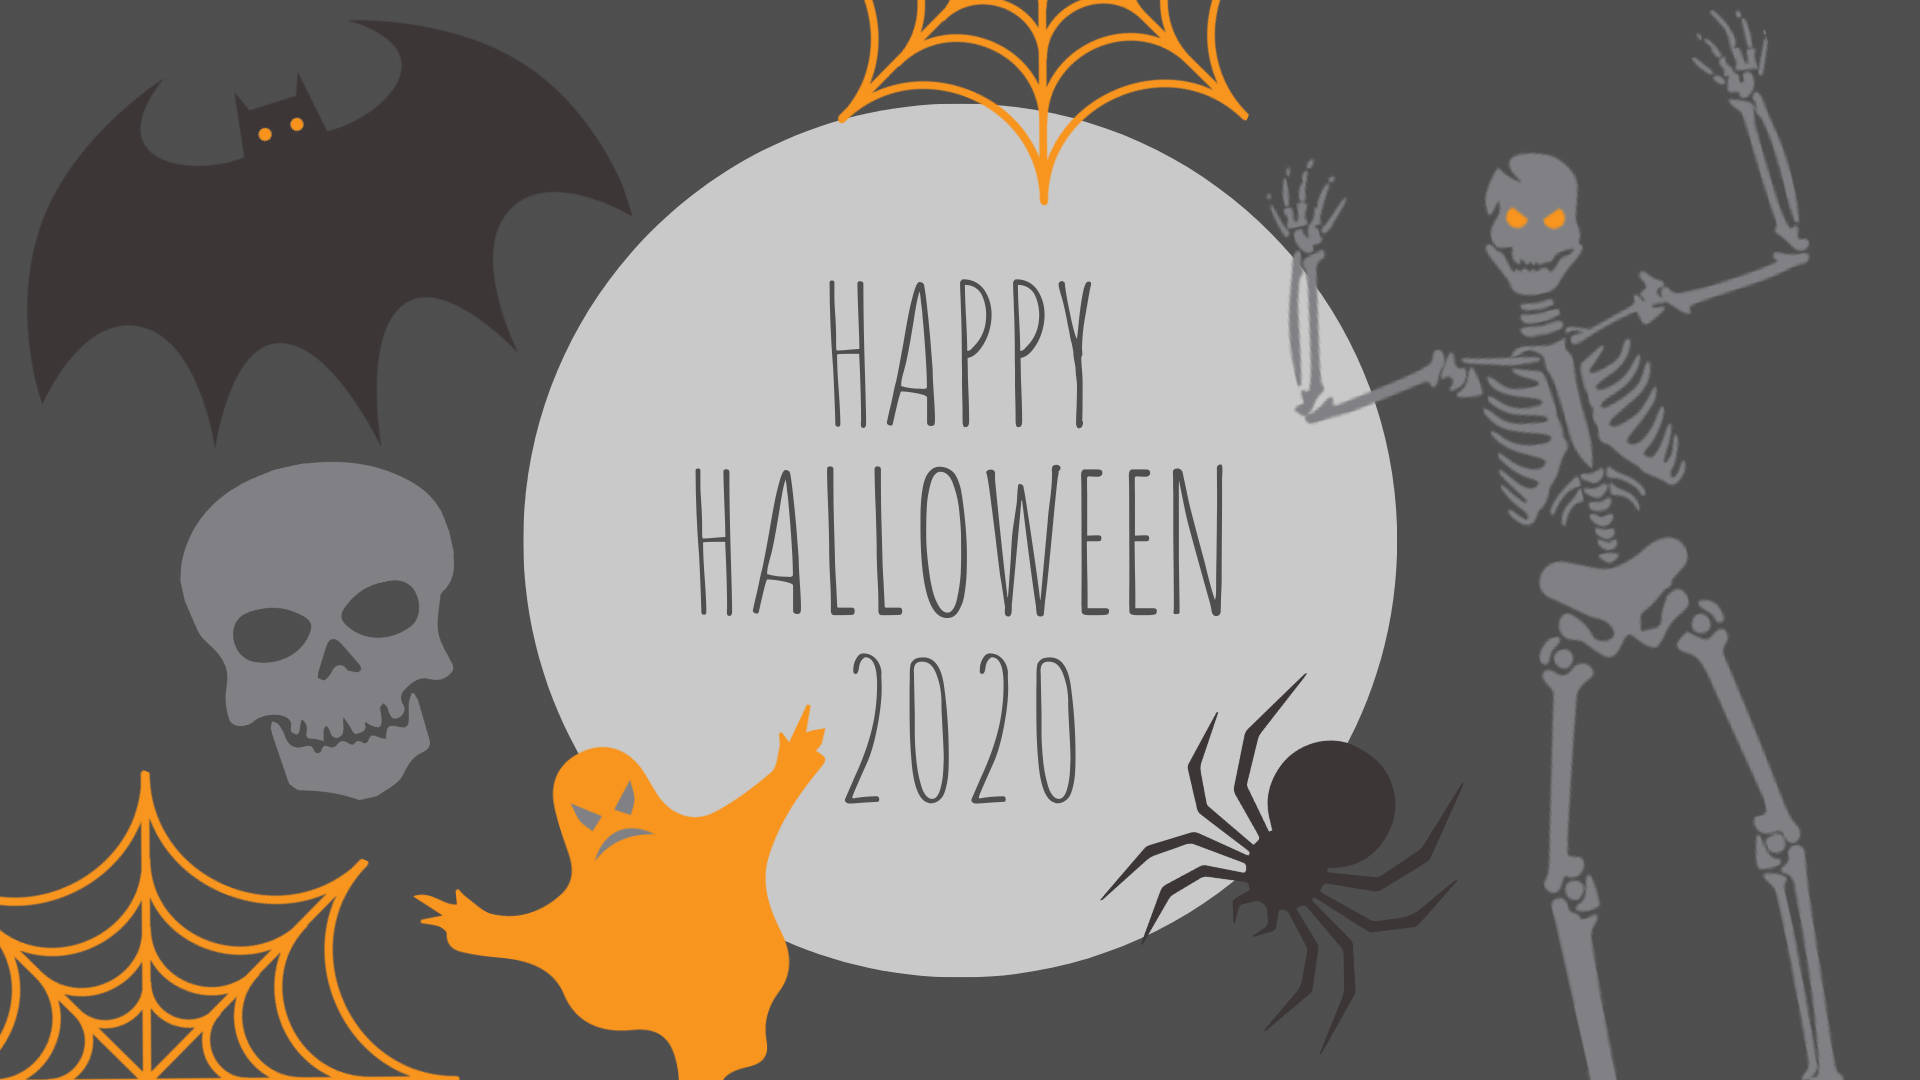 Celebrate Happy Halloween with this spooky image! Wallpaper